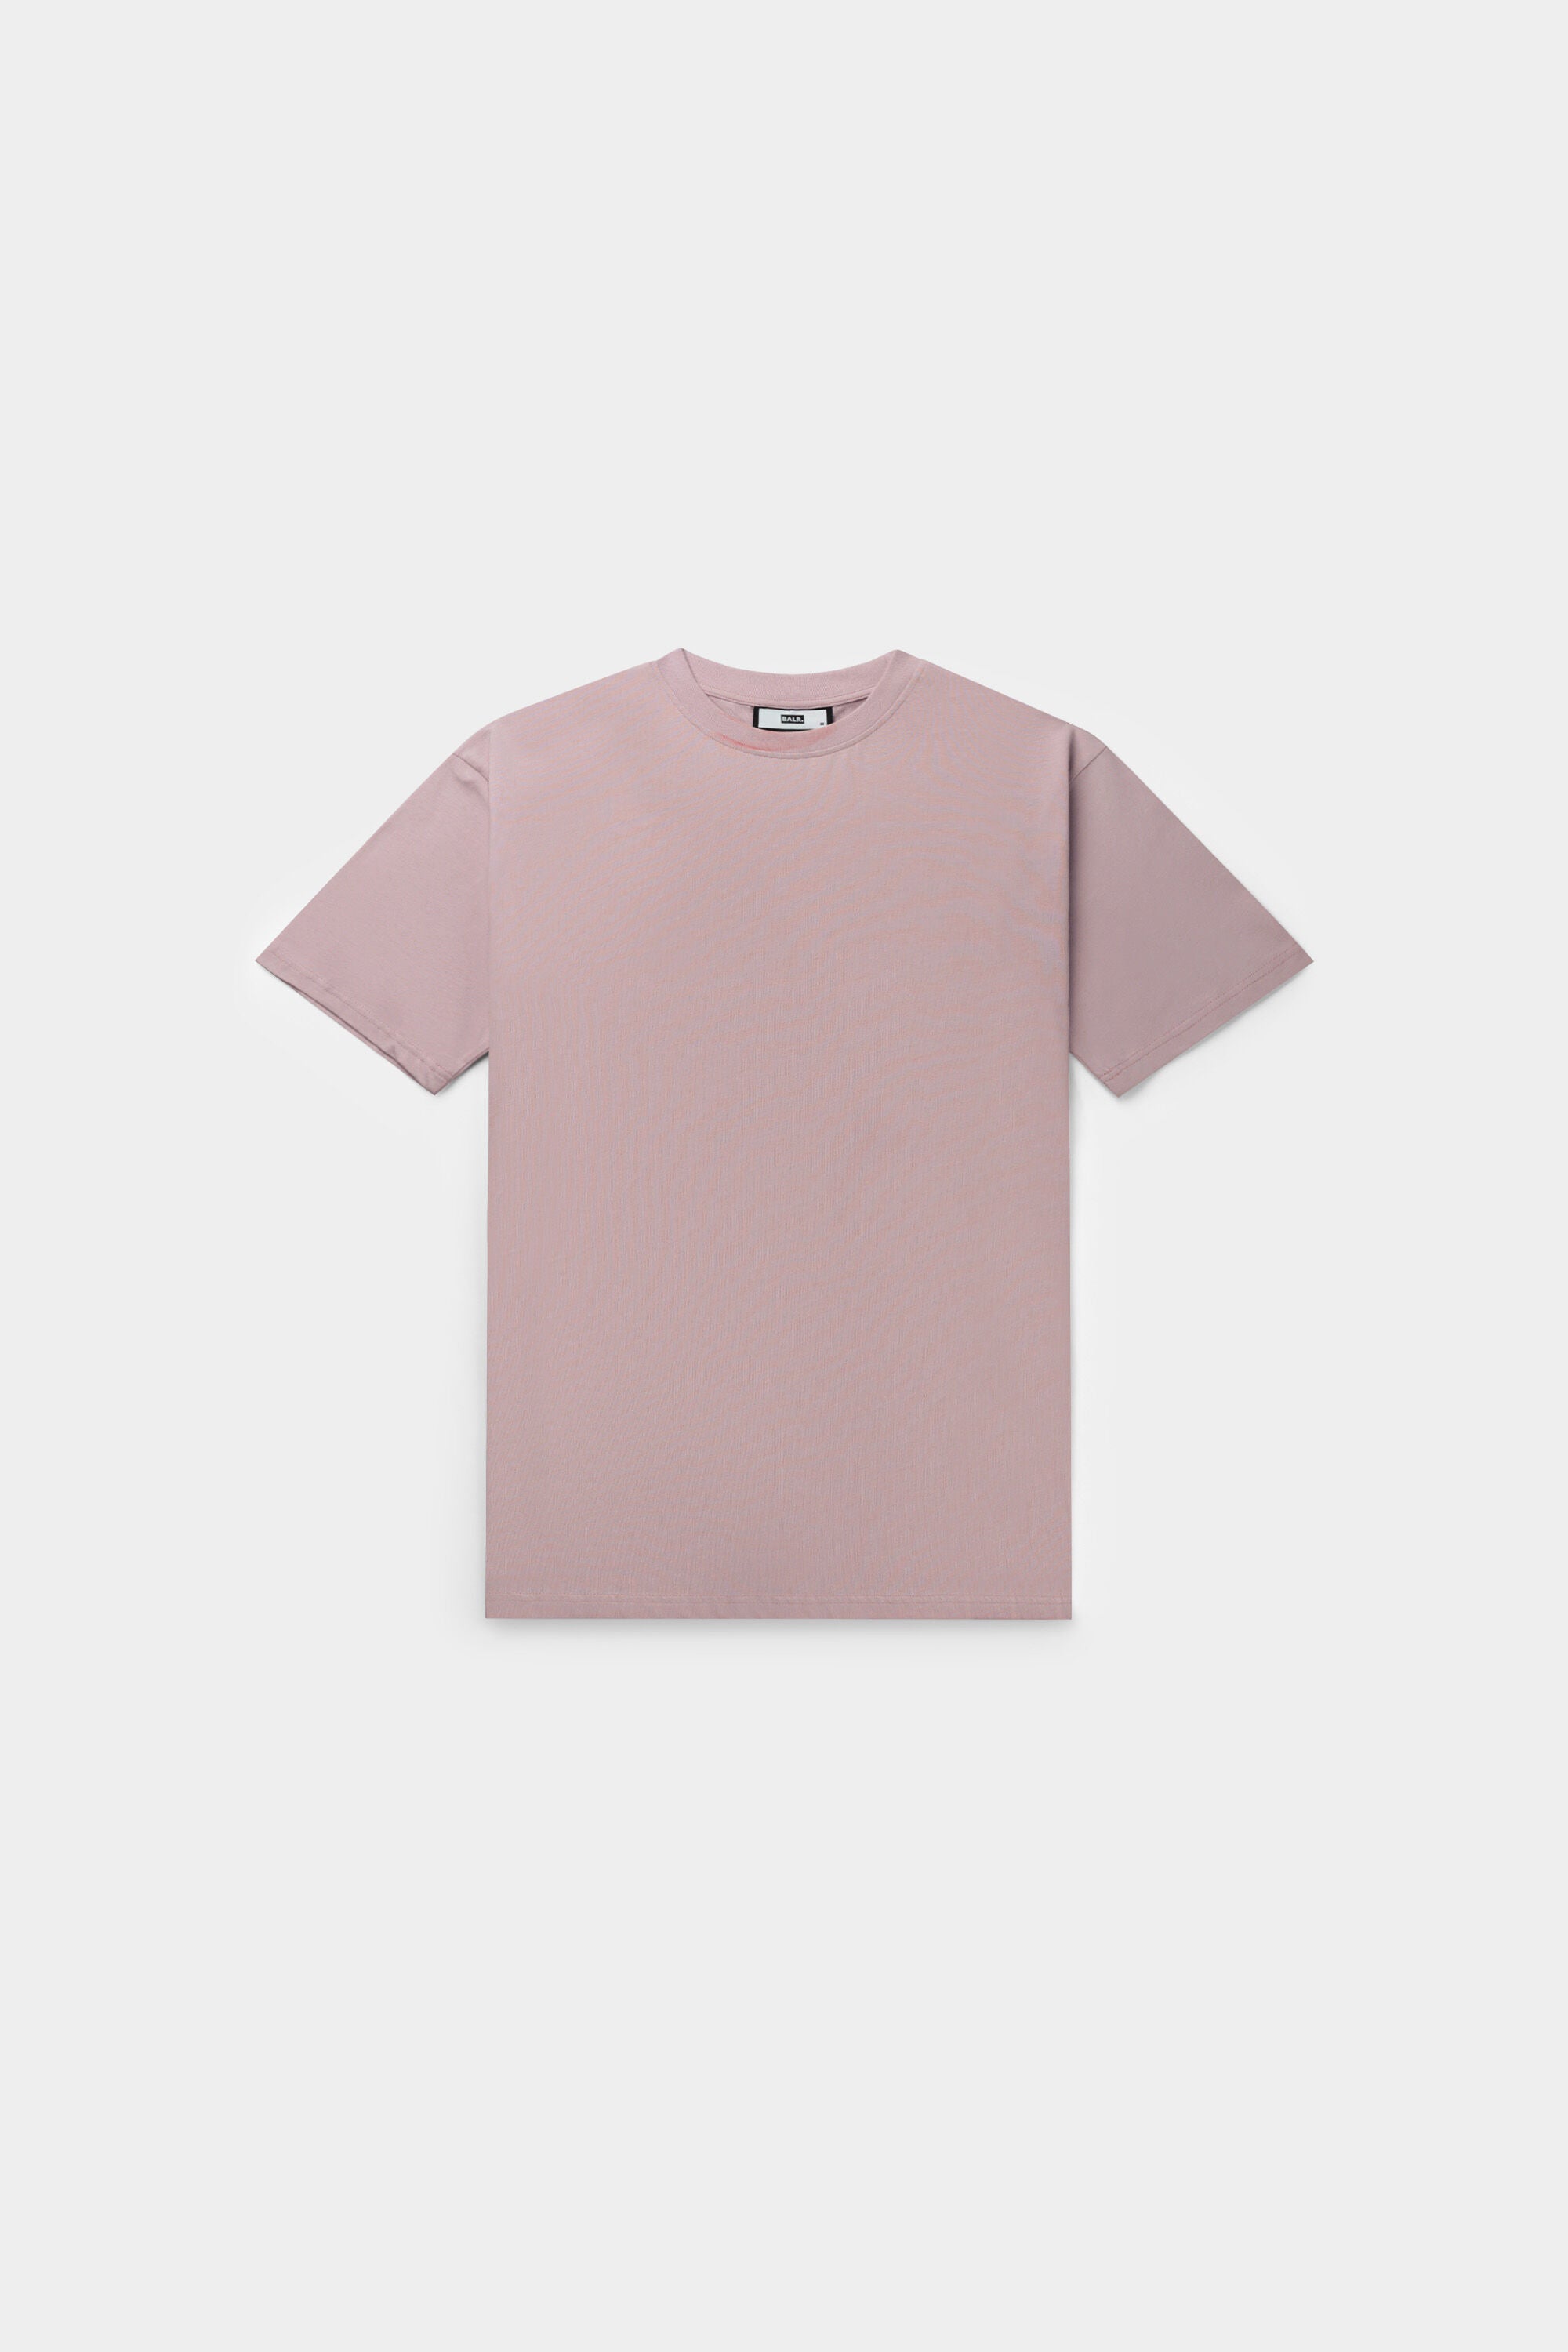 Game Day Box Fit T-Shirt Burnished Lilac